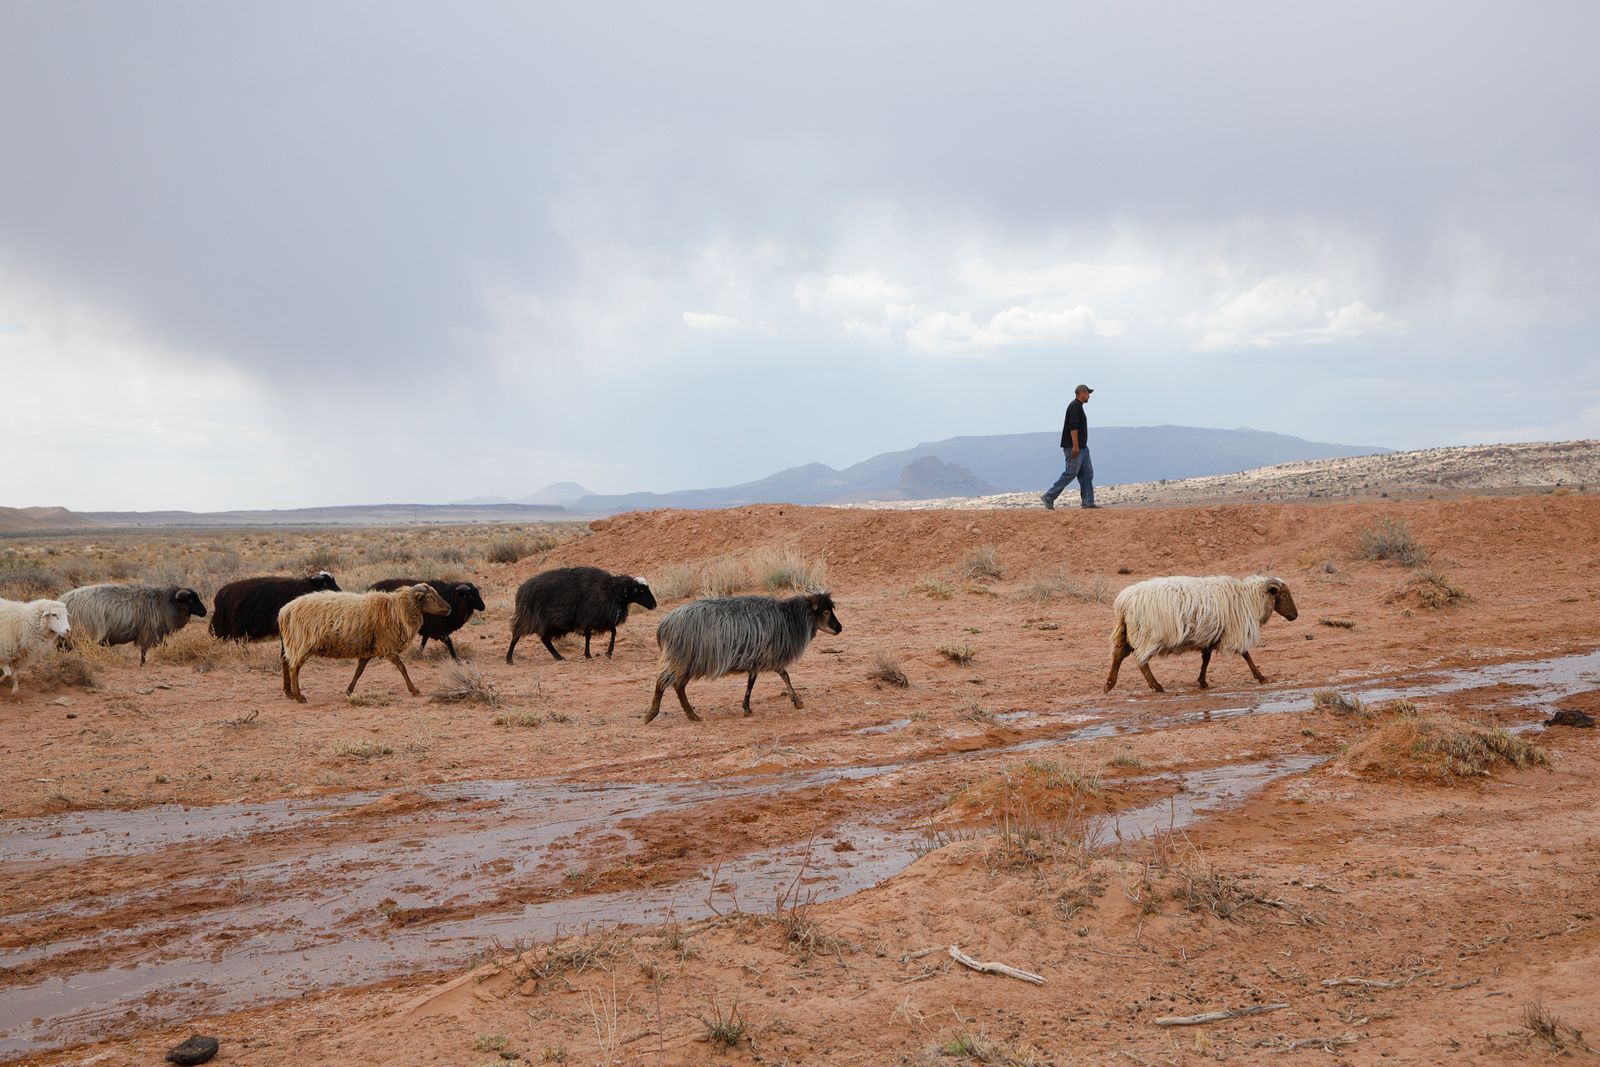 © Julien McRoberts - Sheep herder guiding the sheep back to the pen at the sheep camp to get sheared.